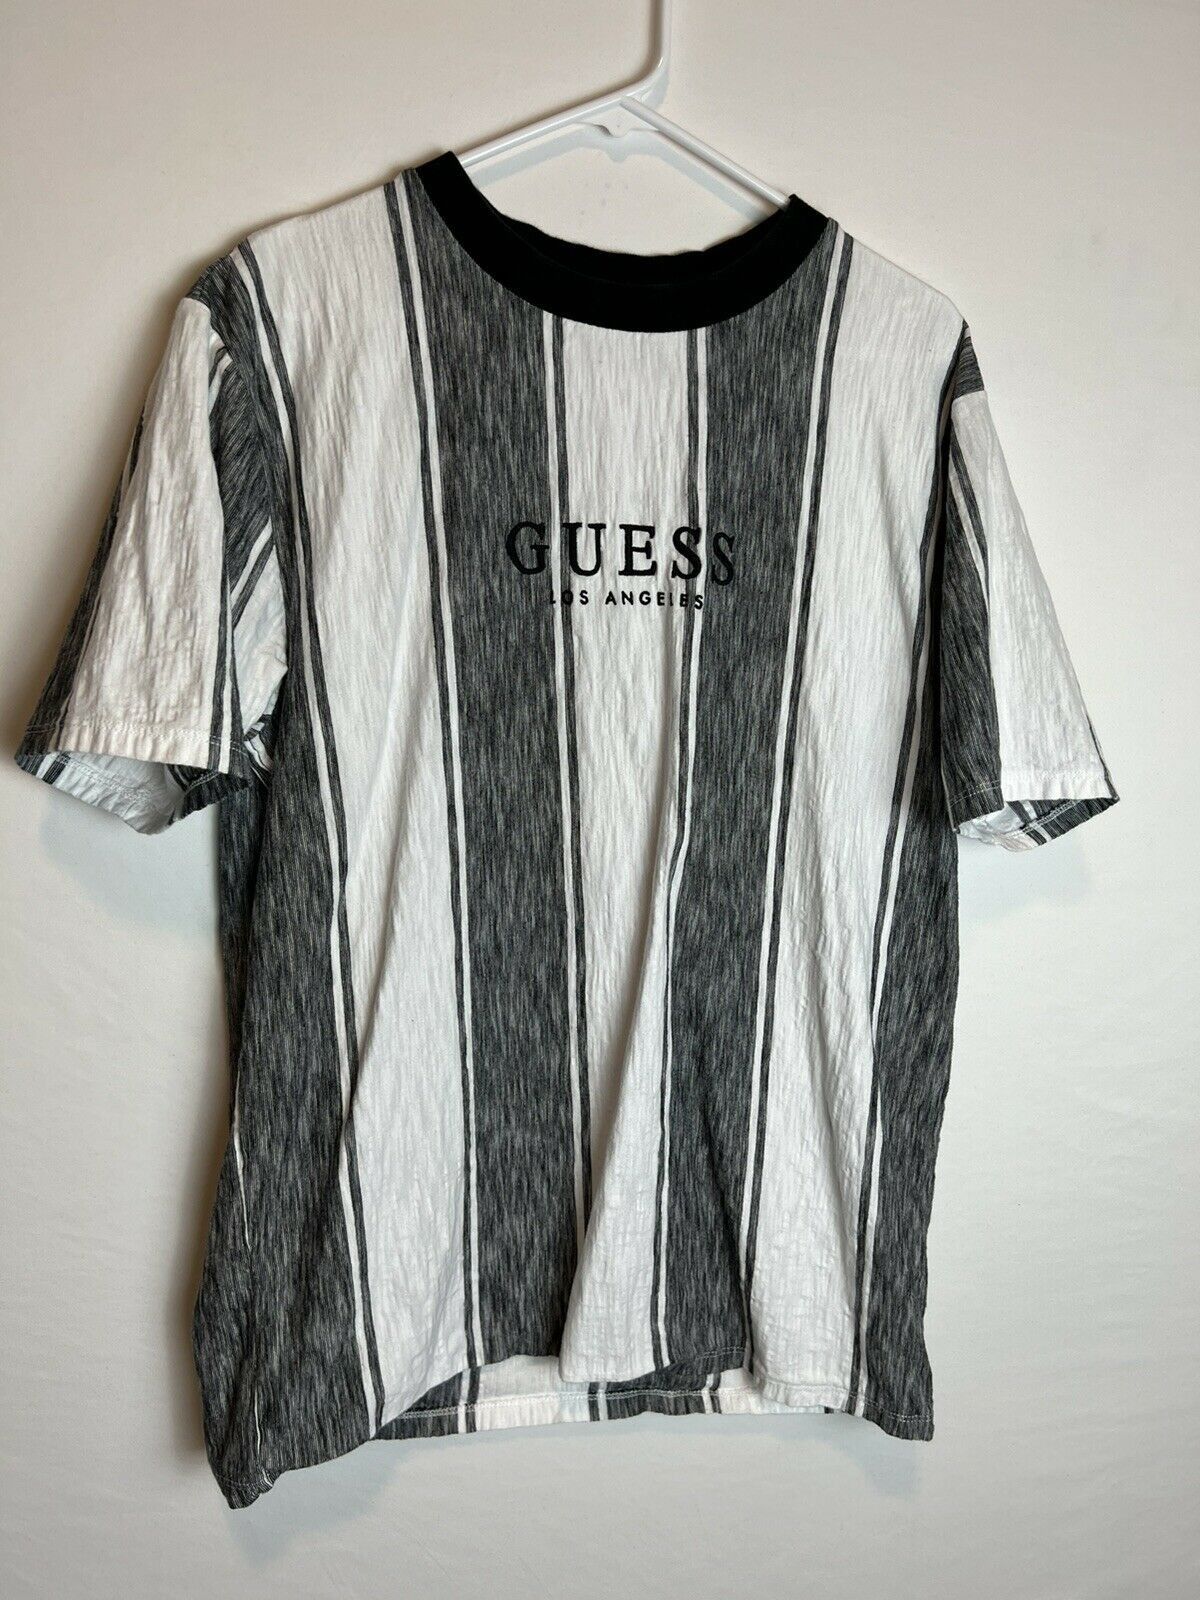 Guess Guess Los Angeles Verticle Striped Black White T-Shirt | Grailed